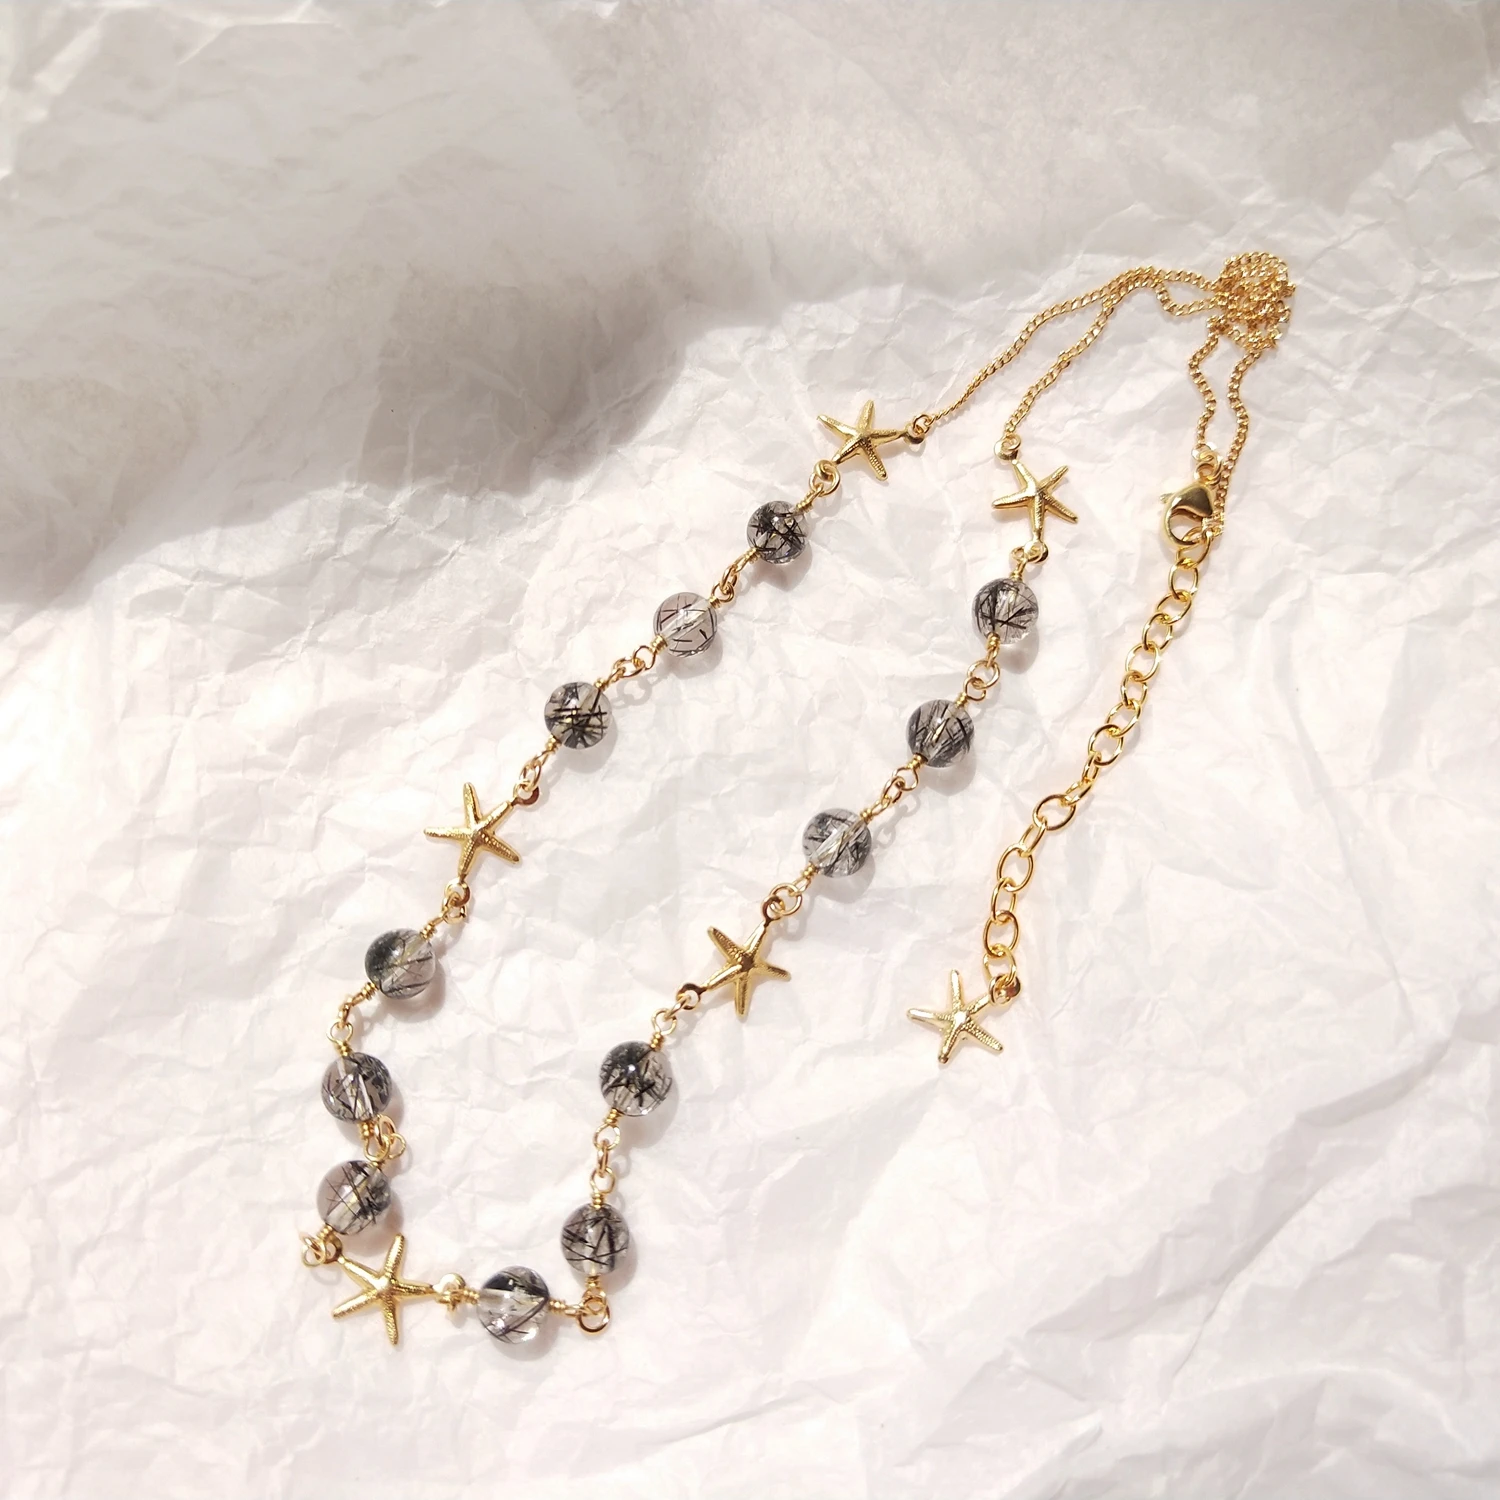 Lack tourmaline quartz 14k gold filled chain stars necklace 40 5cm real natural crystal thumb200